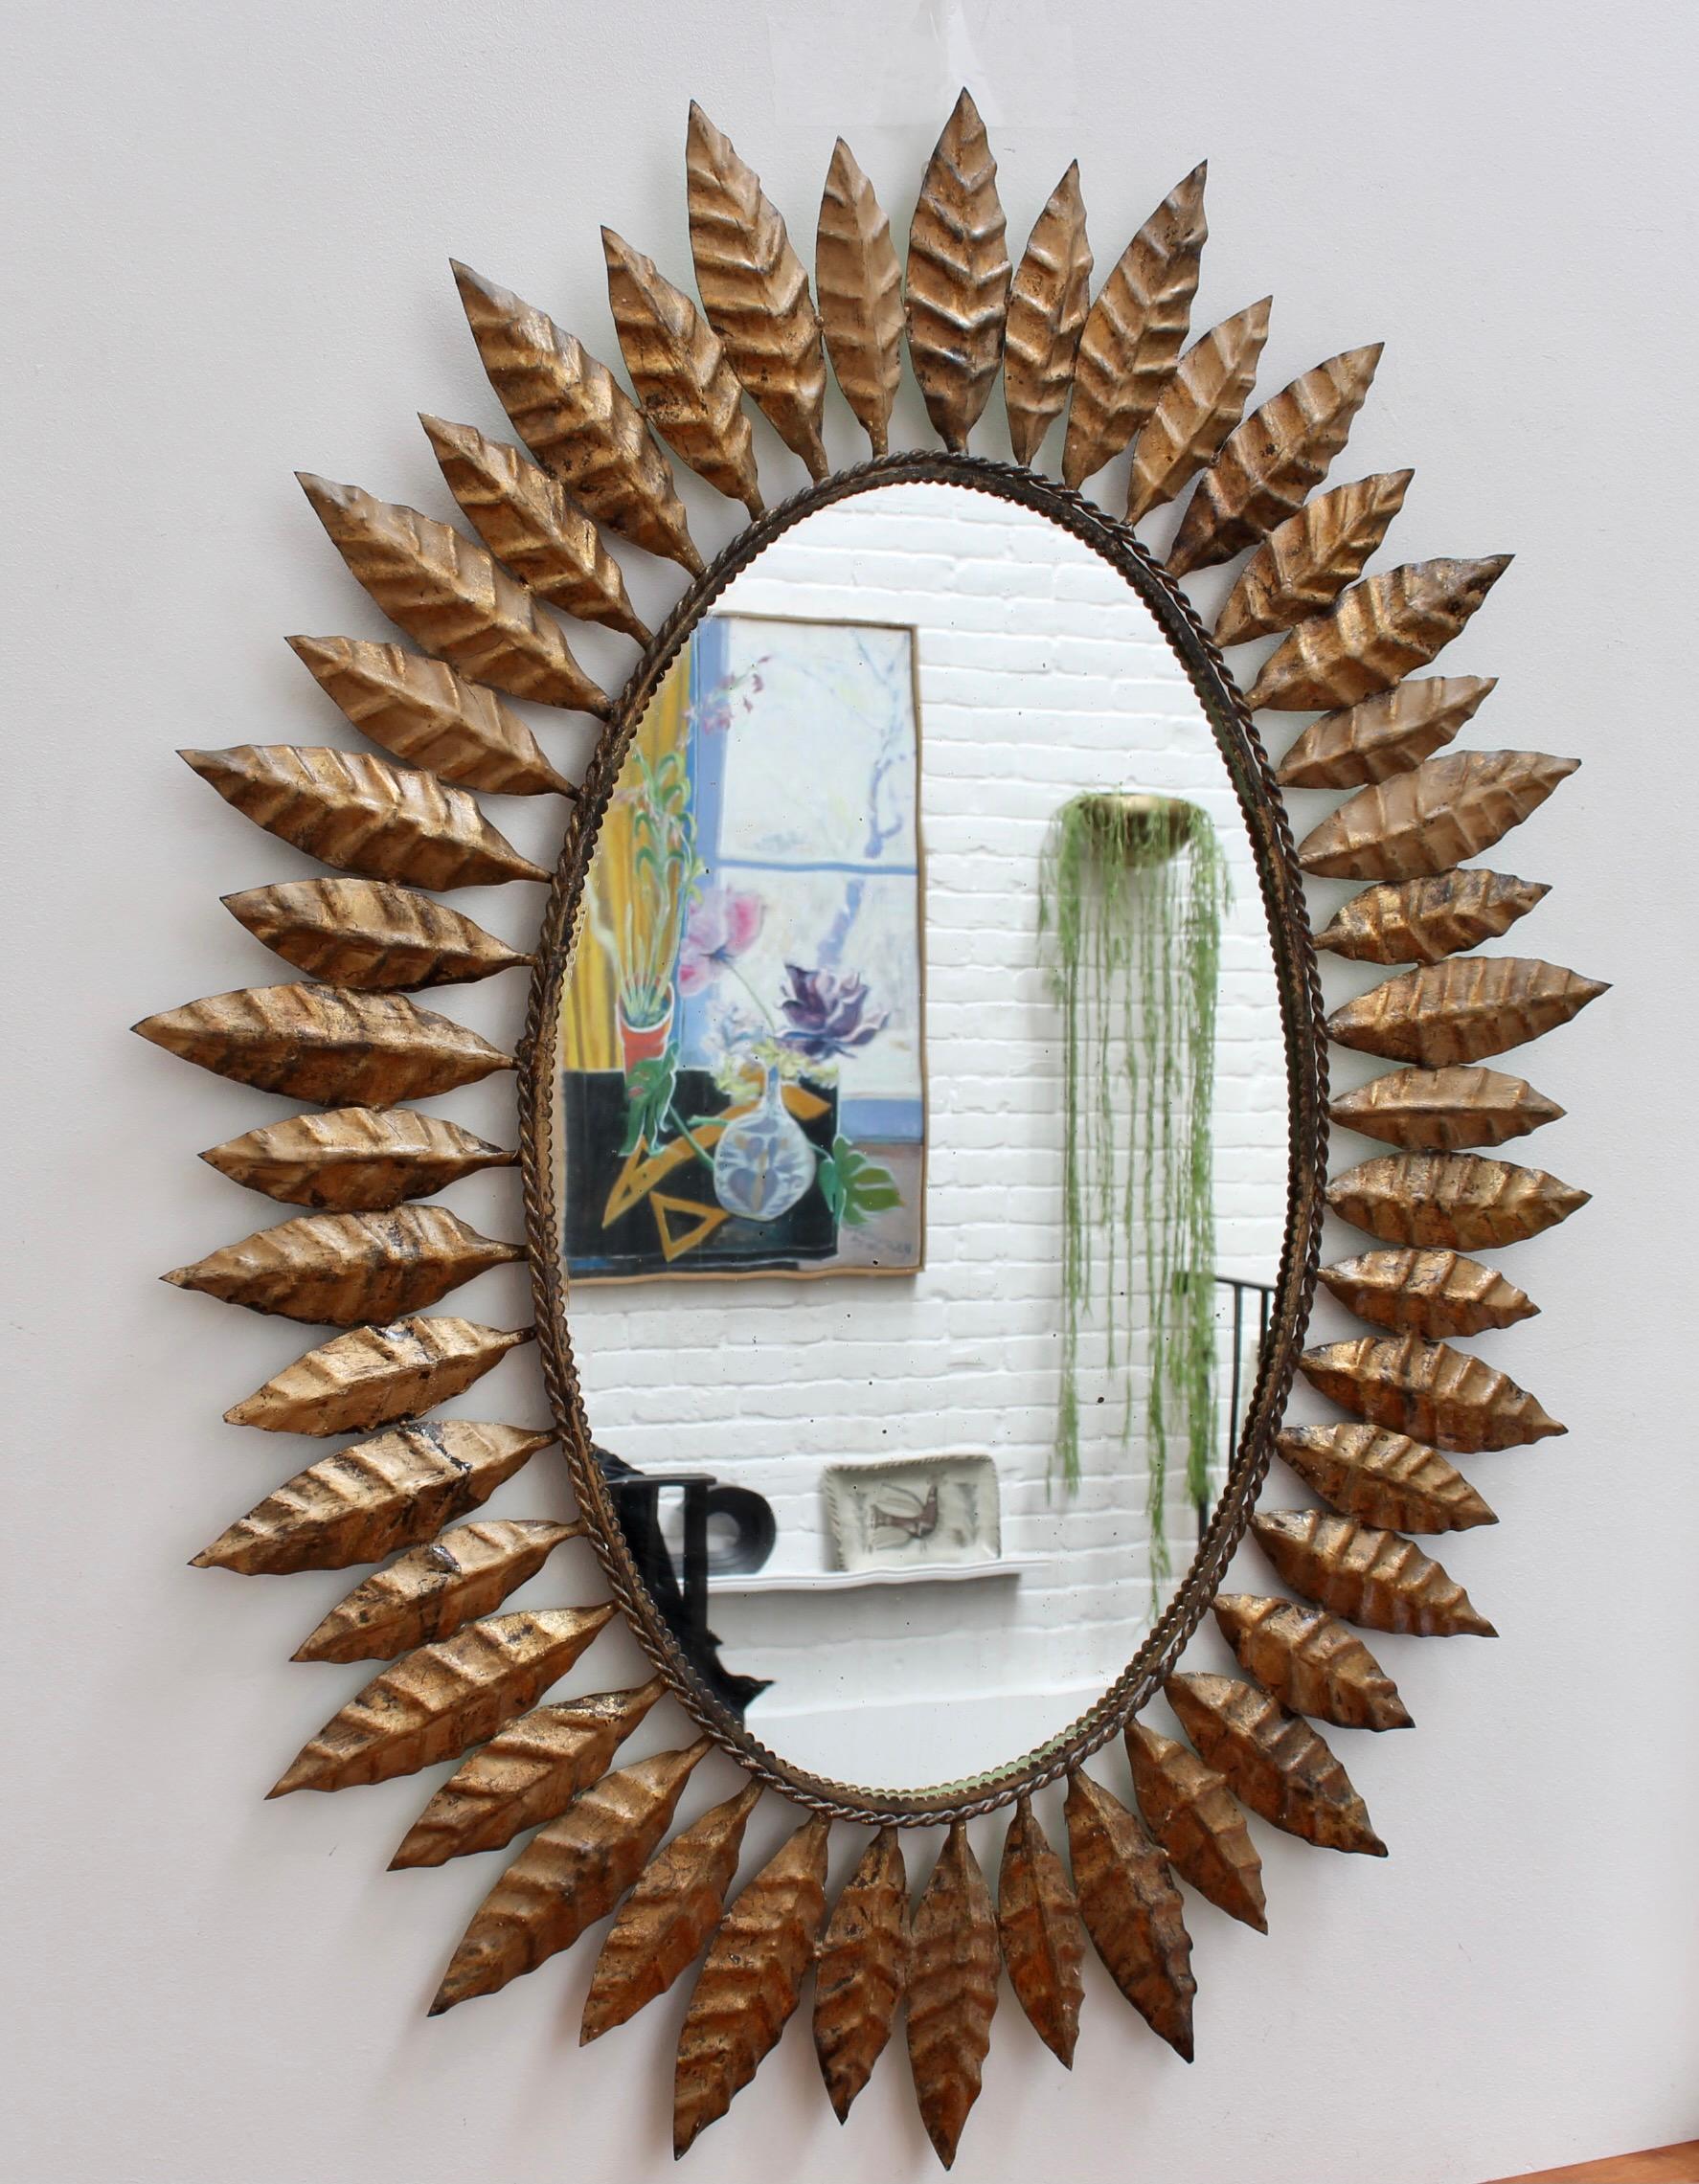 Spanish gilt tôle sunburst mirror (c. 1970s) with leaf motif and rope and wave-pattern border. The frame is in good overall condition - the glass surface has some blemishing and / or authentic age spots adding character while reflecting its true age